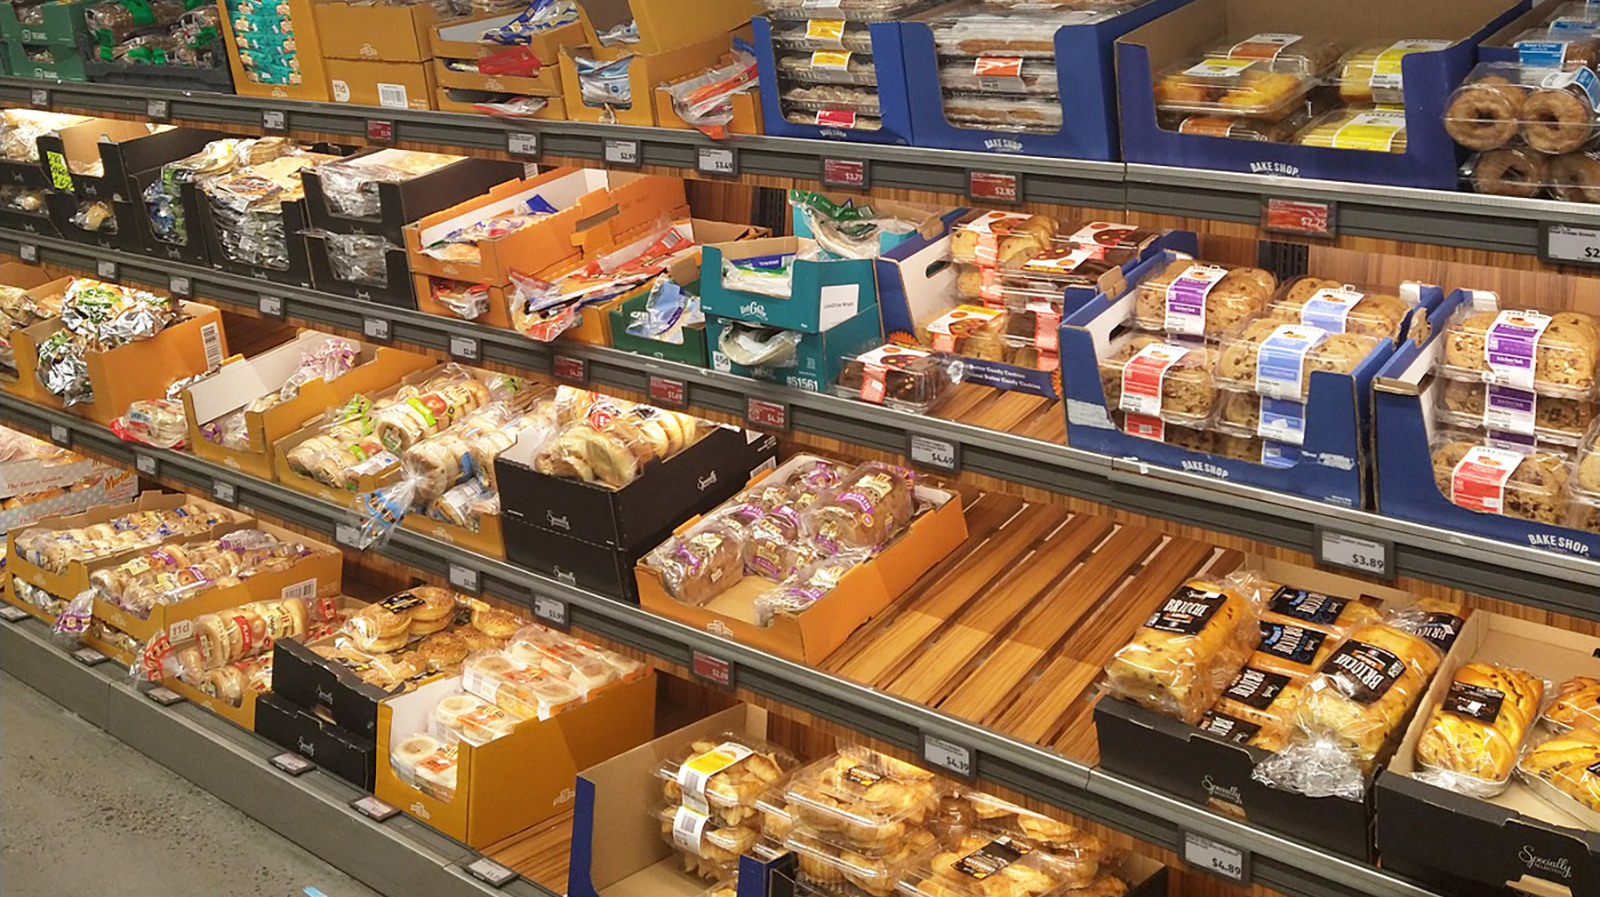 https://www.mashed.com/img/gallery/21-aldi-bakery-items-ranked-worst-to-best/l-intro-1680193133.jpg